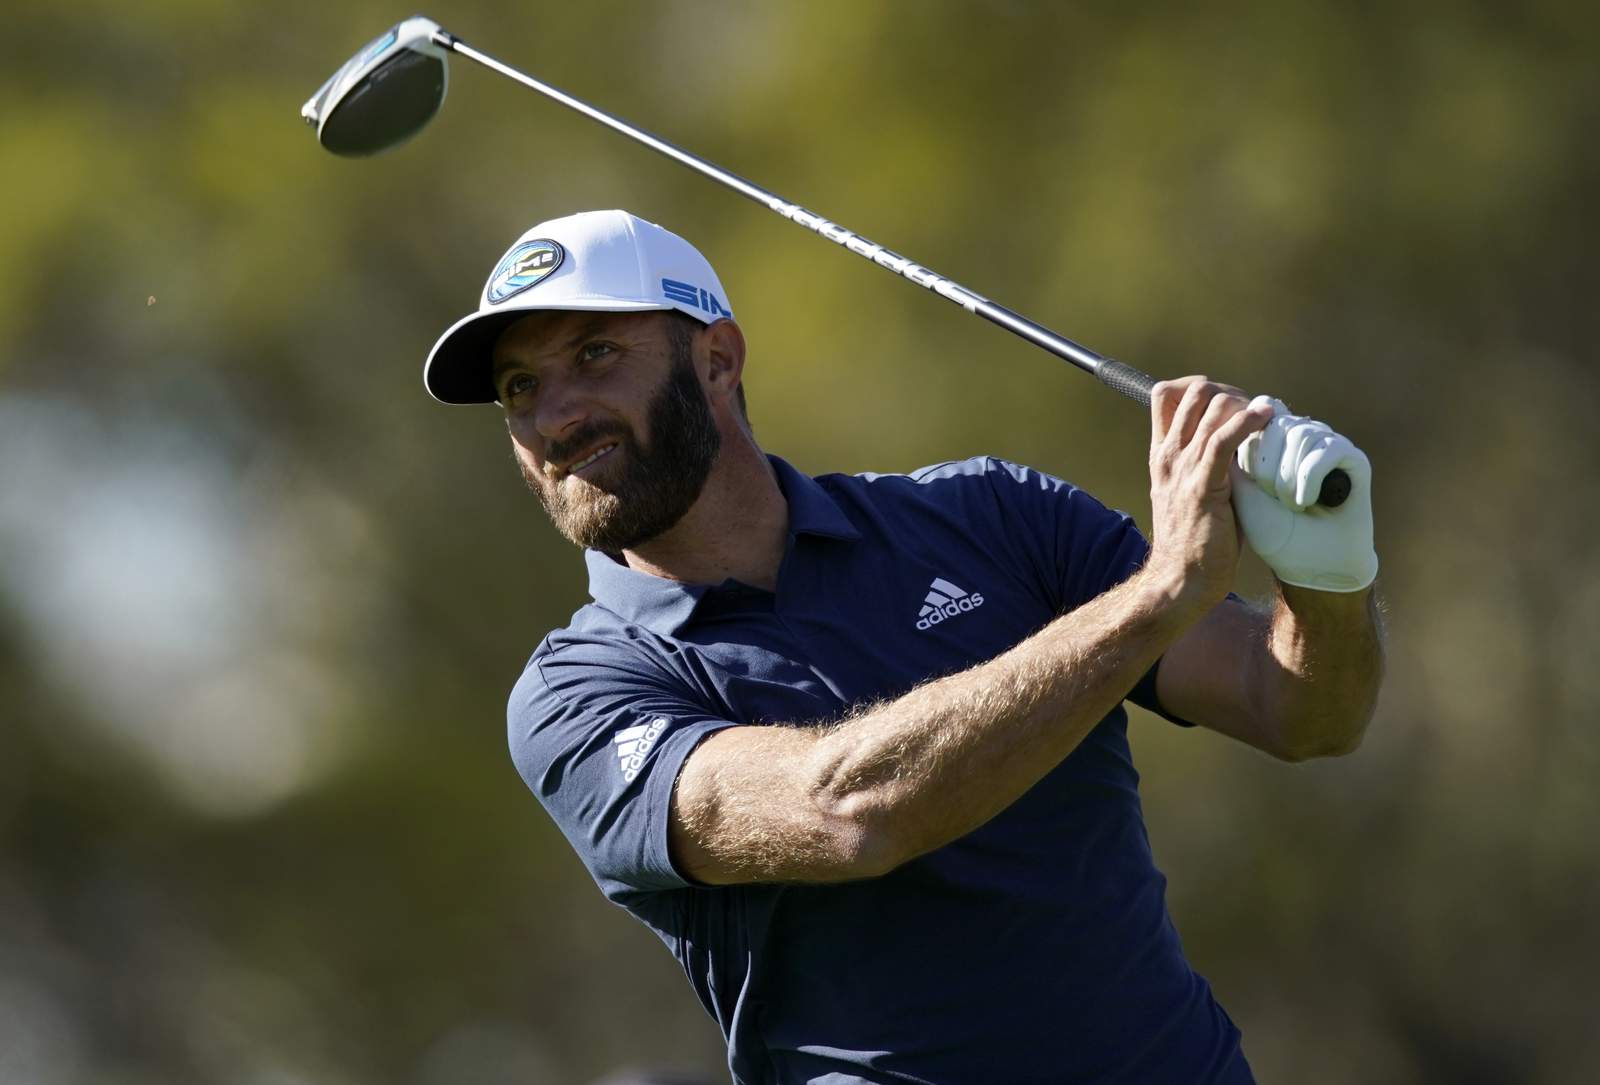 No. 1 ranked Dustin Johnson among top golfers committing to The Players